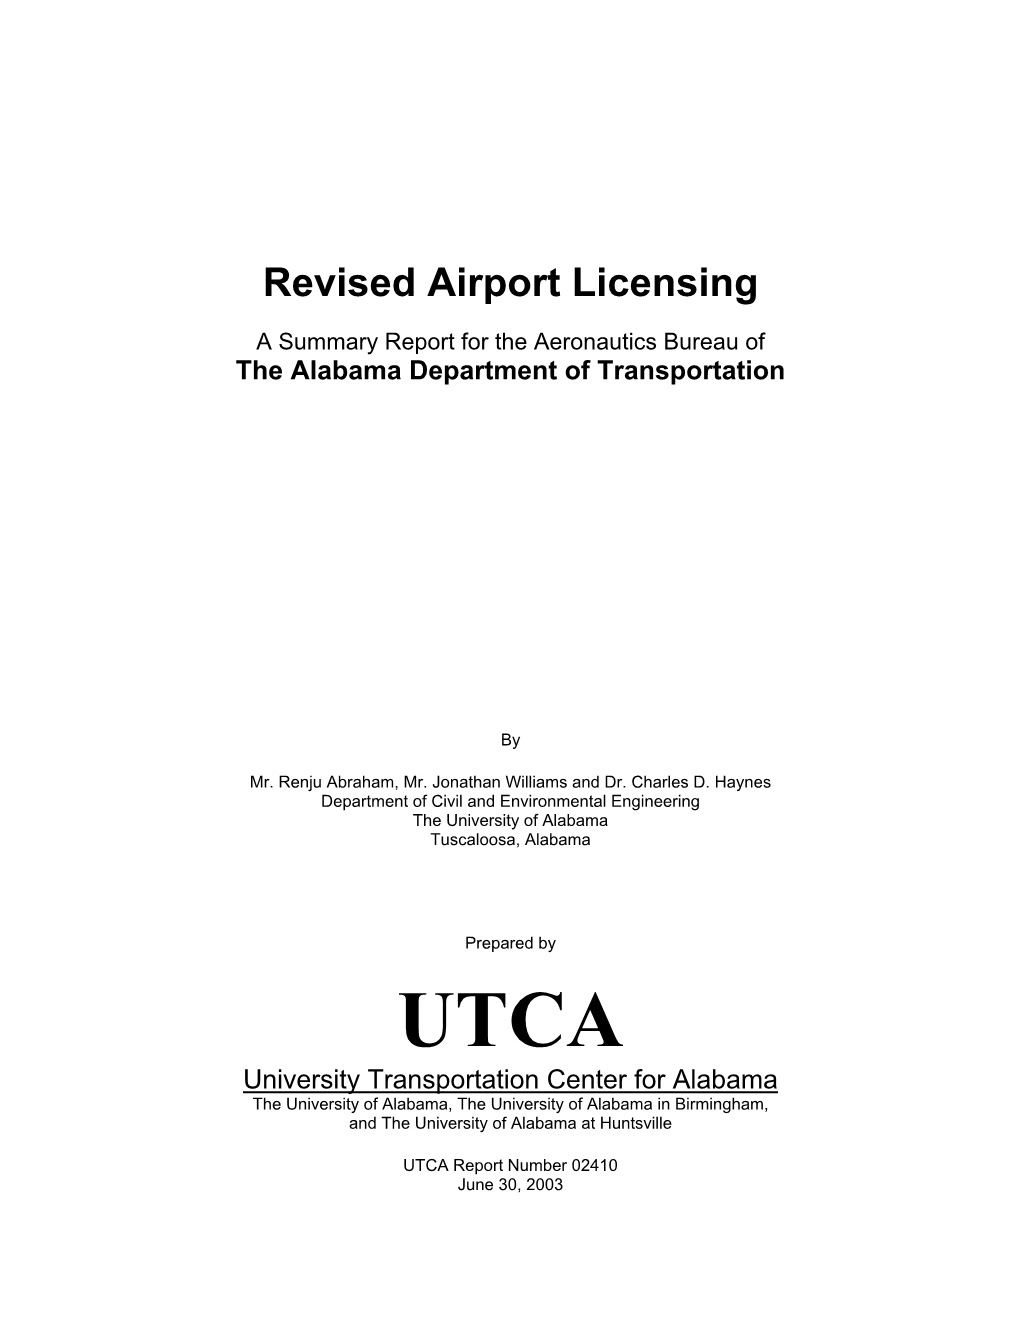 Revised Airport Licensing: a Summary Report for The